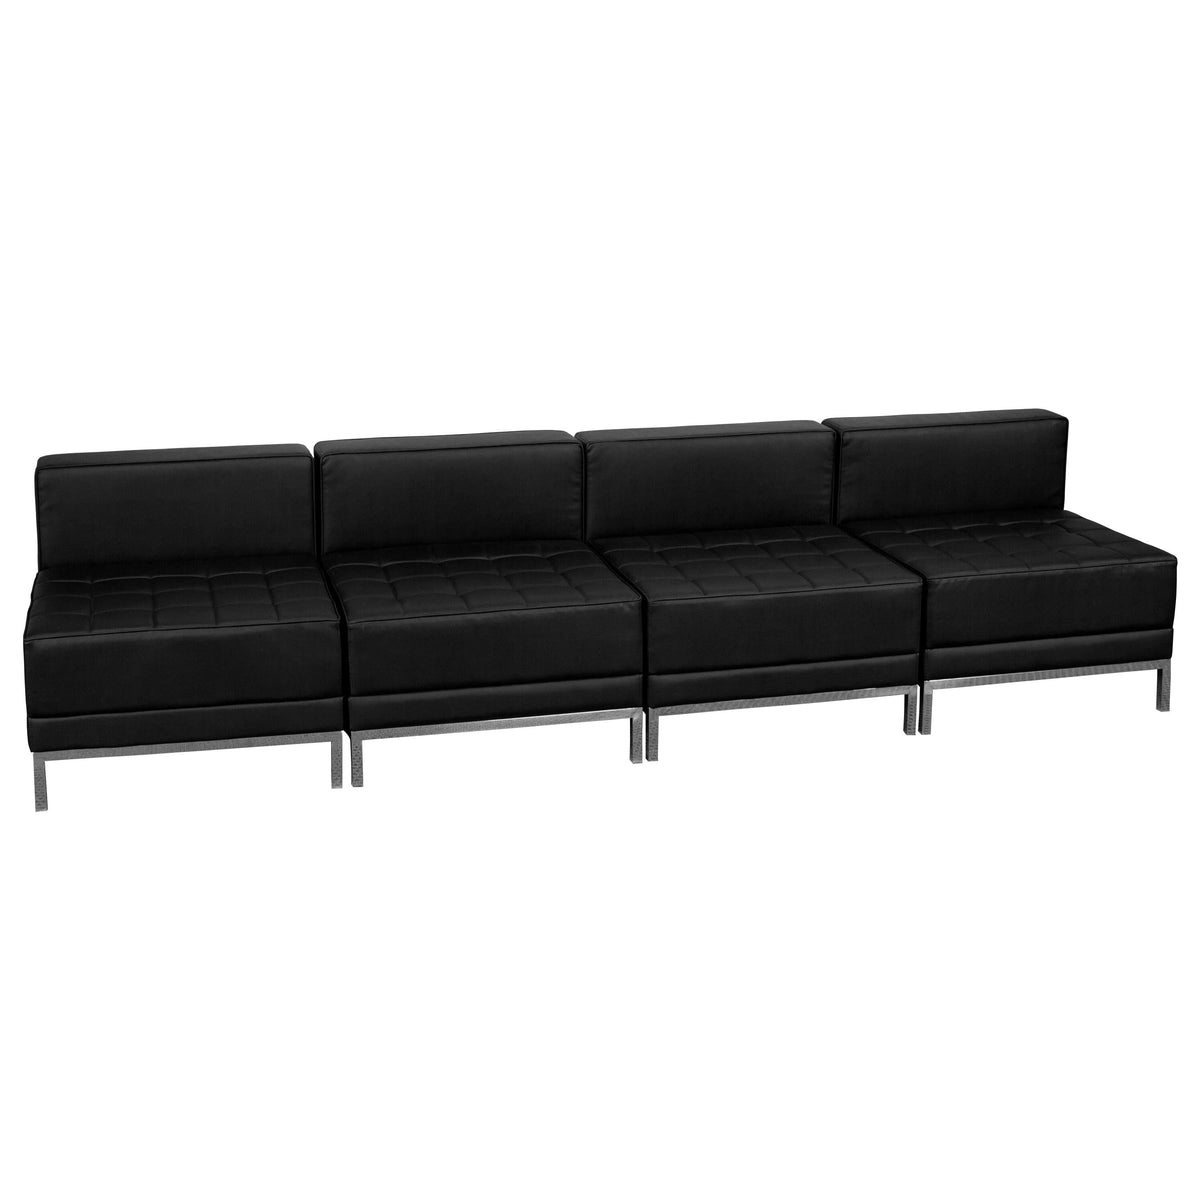 Black |#| 4 Piece Black LeatherSoft Modular Lounge Set with Taut Back and Seat